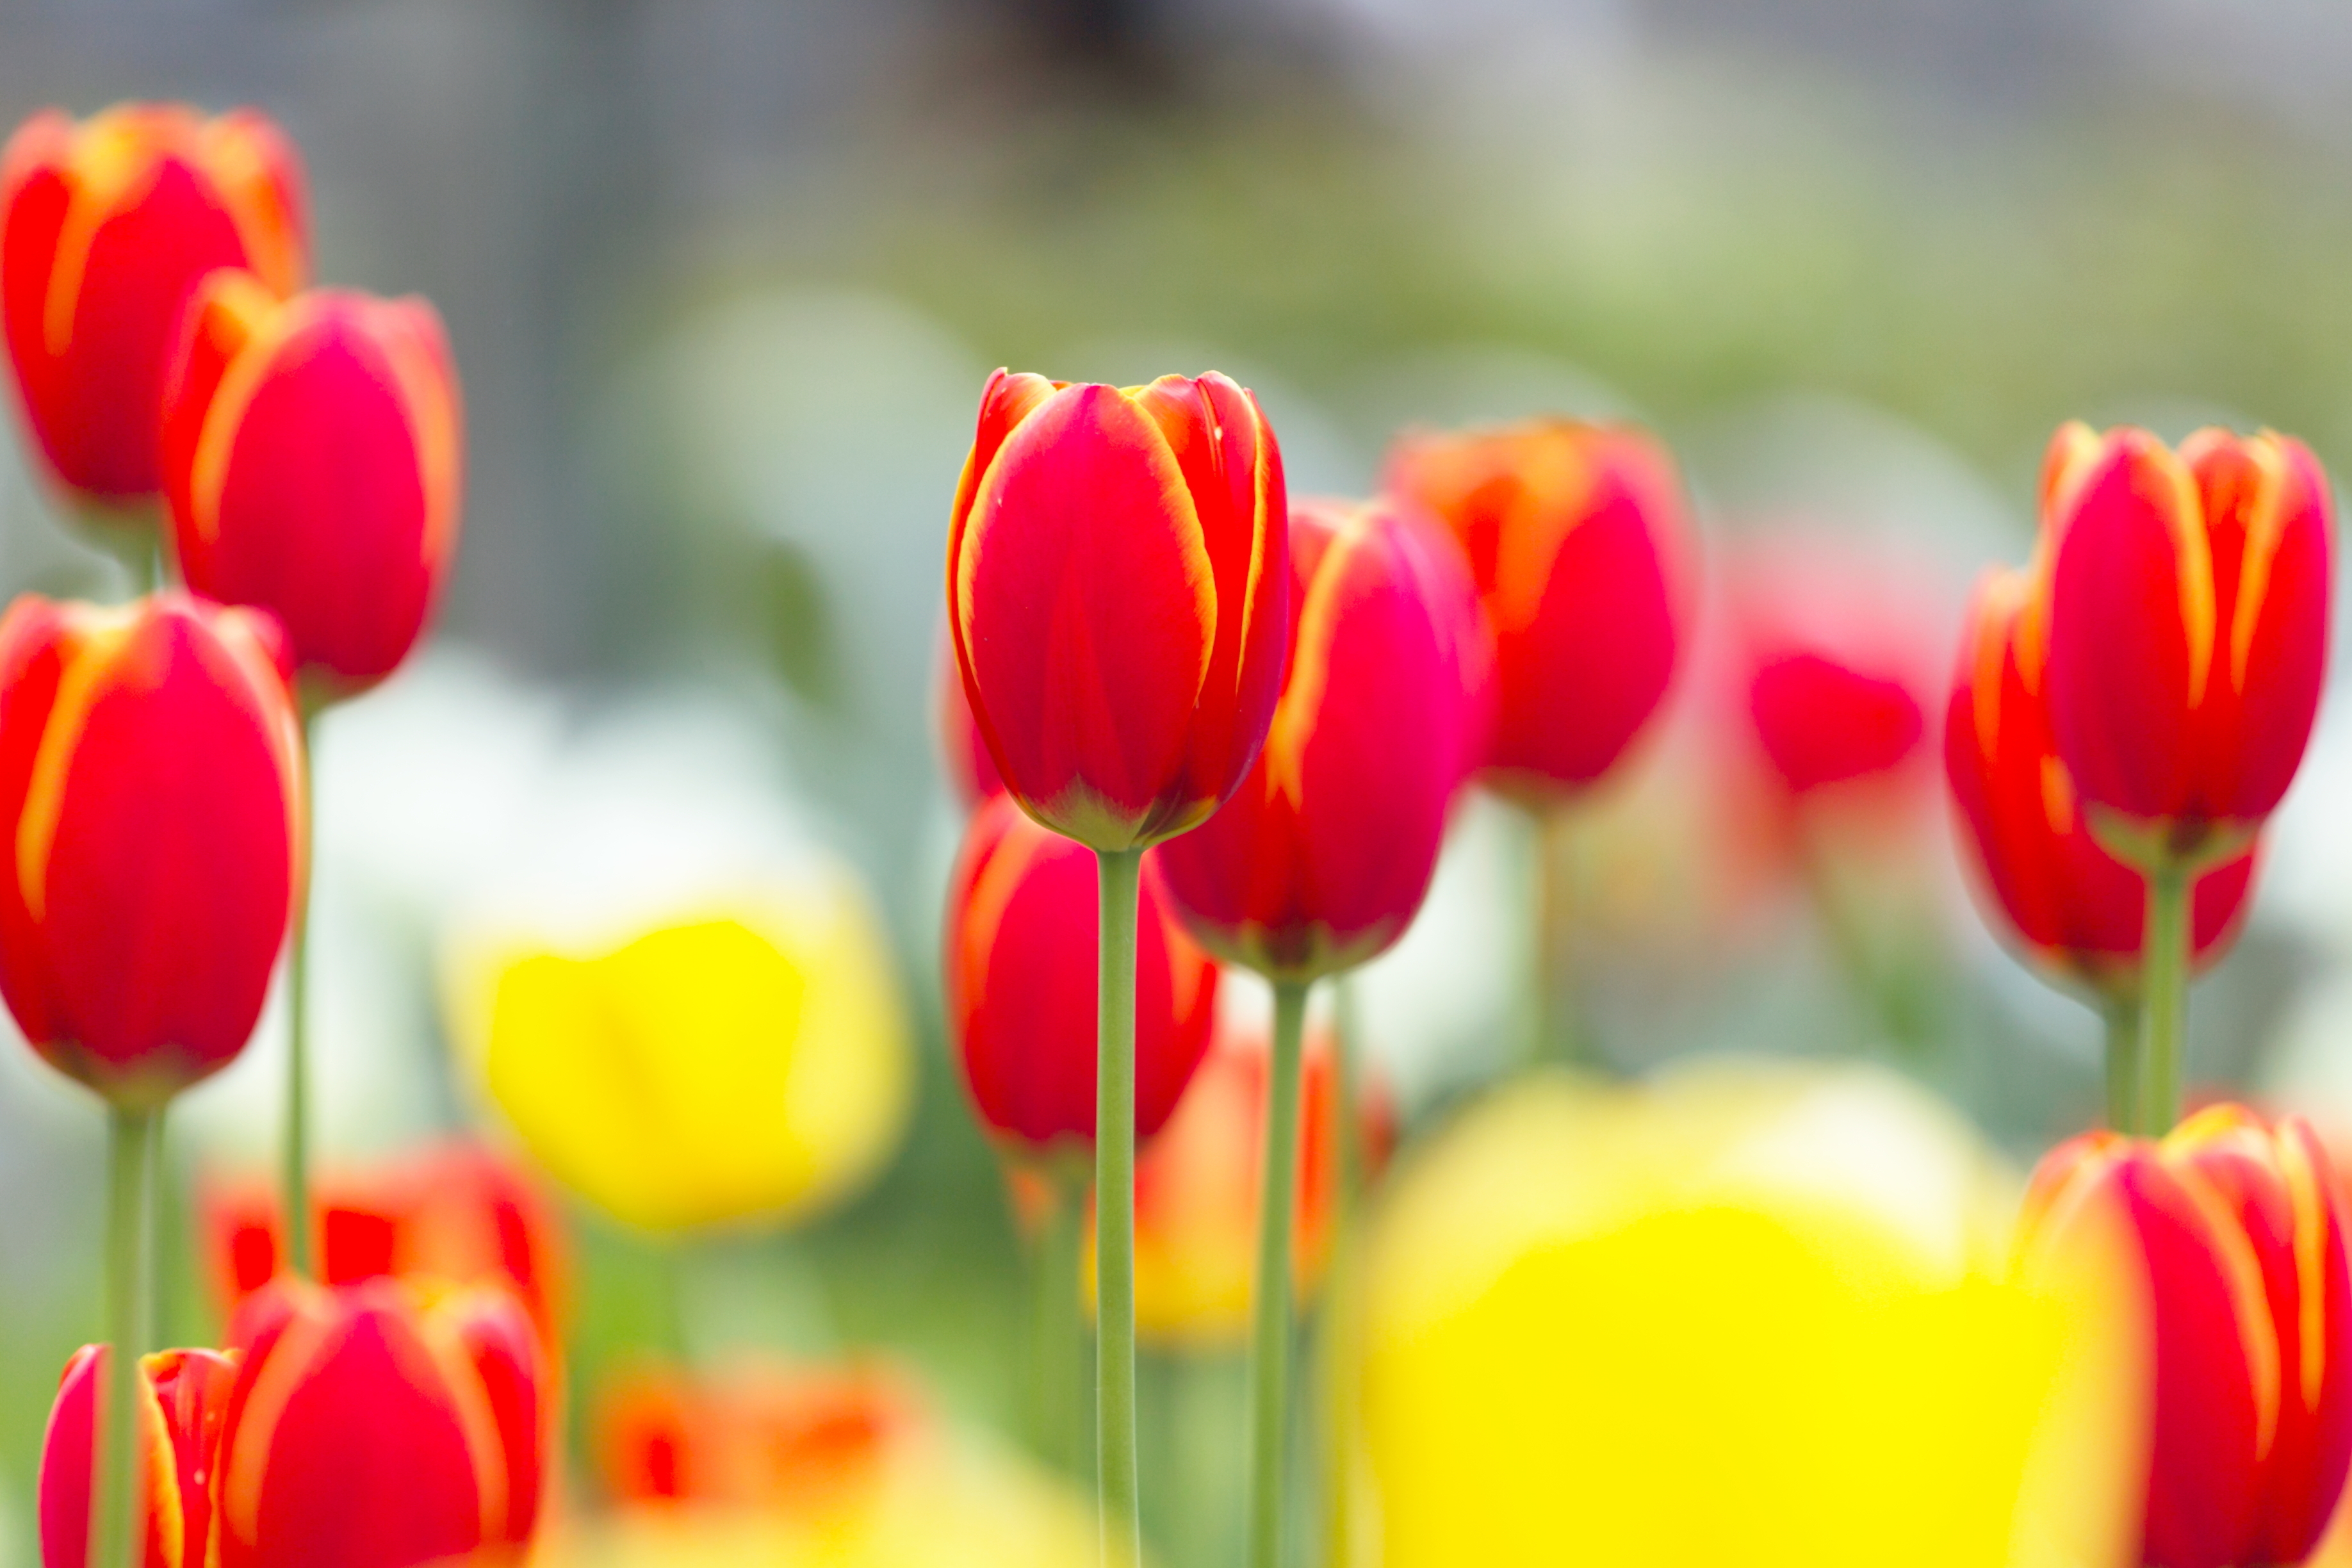 Red with yellow tulips wallpapers and images - wallpapers ...